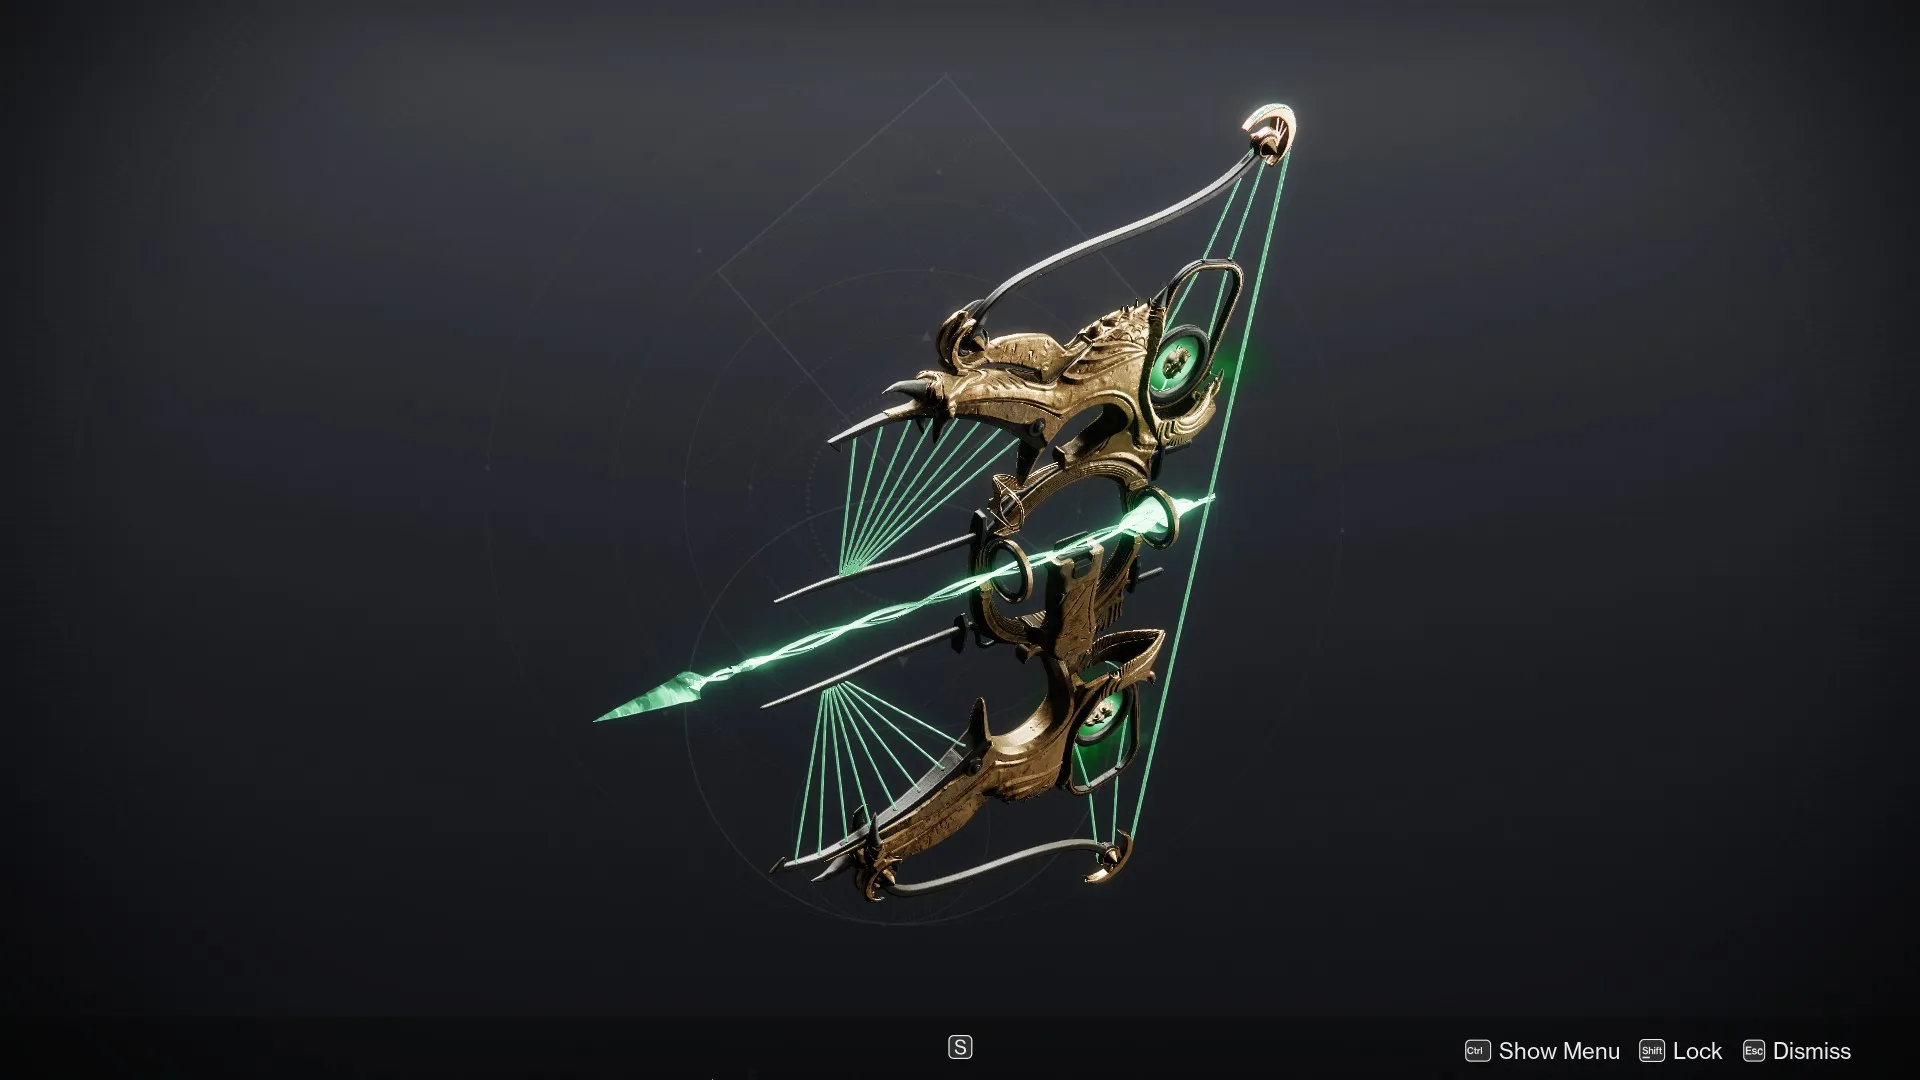 The Wish-Keeper Exotic bow in Destiny 2, as seen in Collections.